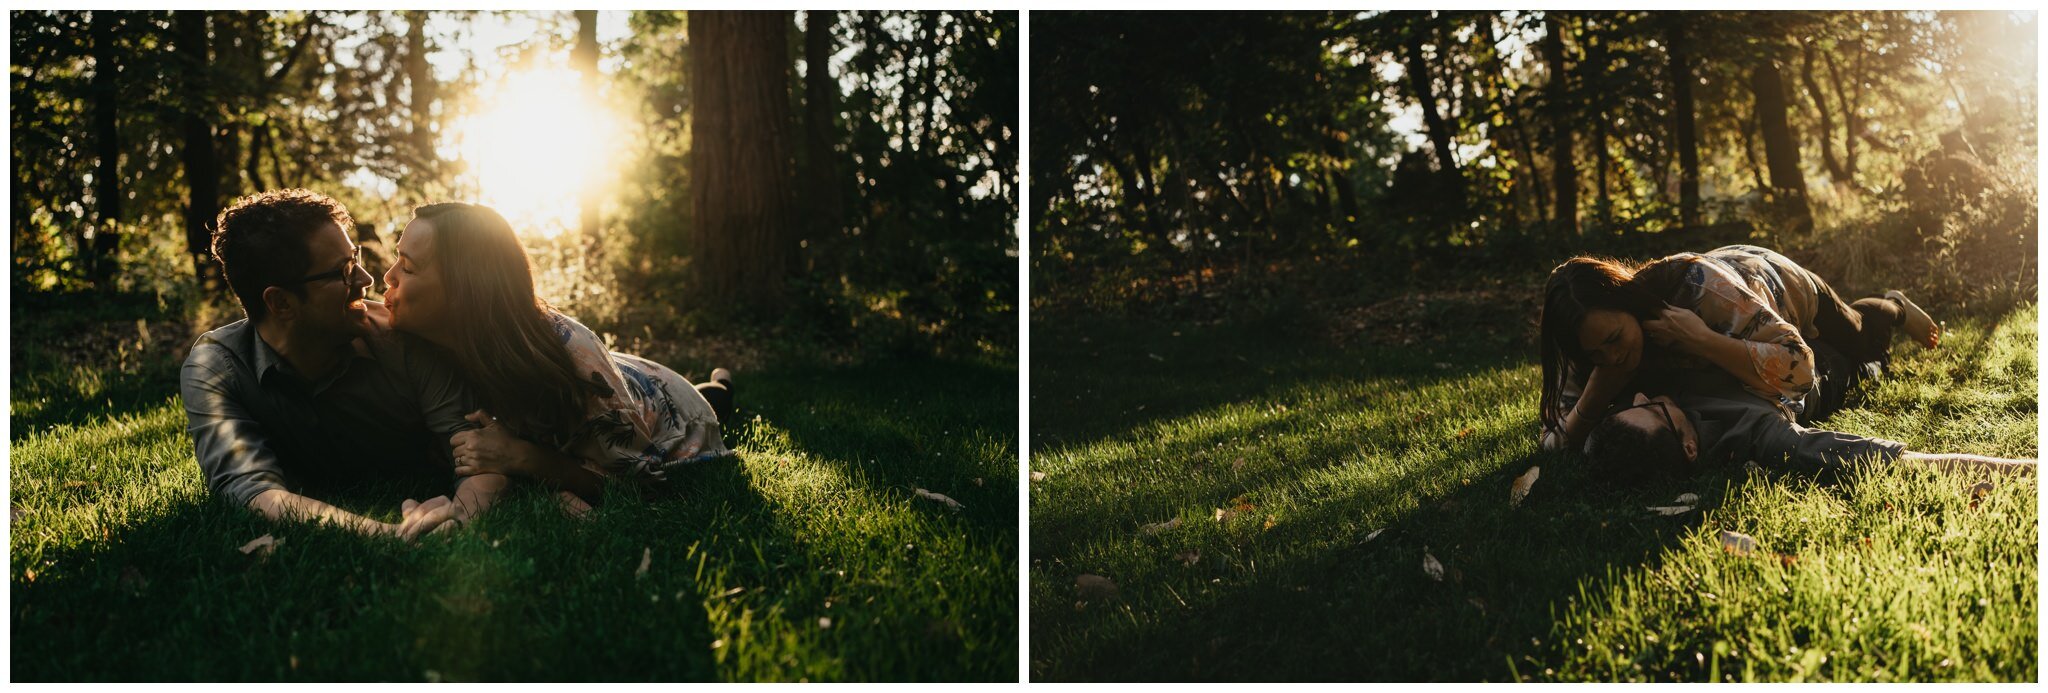 sunkissed-northacres-park-engagement-session-bethany-phil-16.jpg